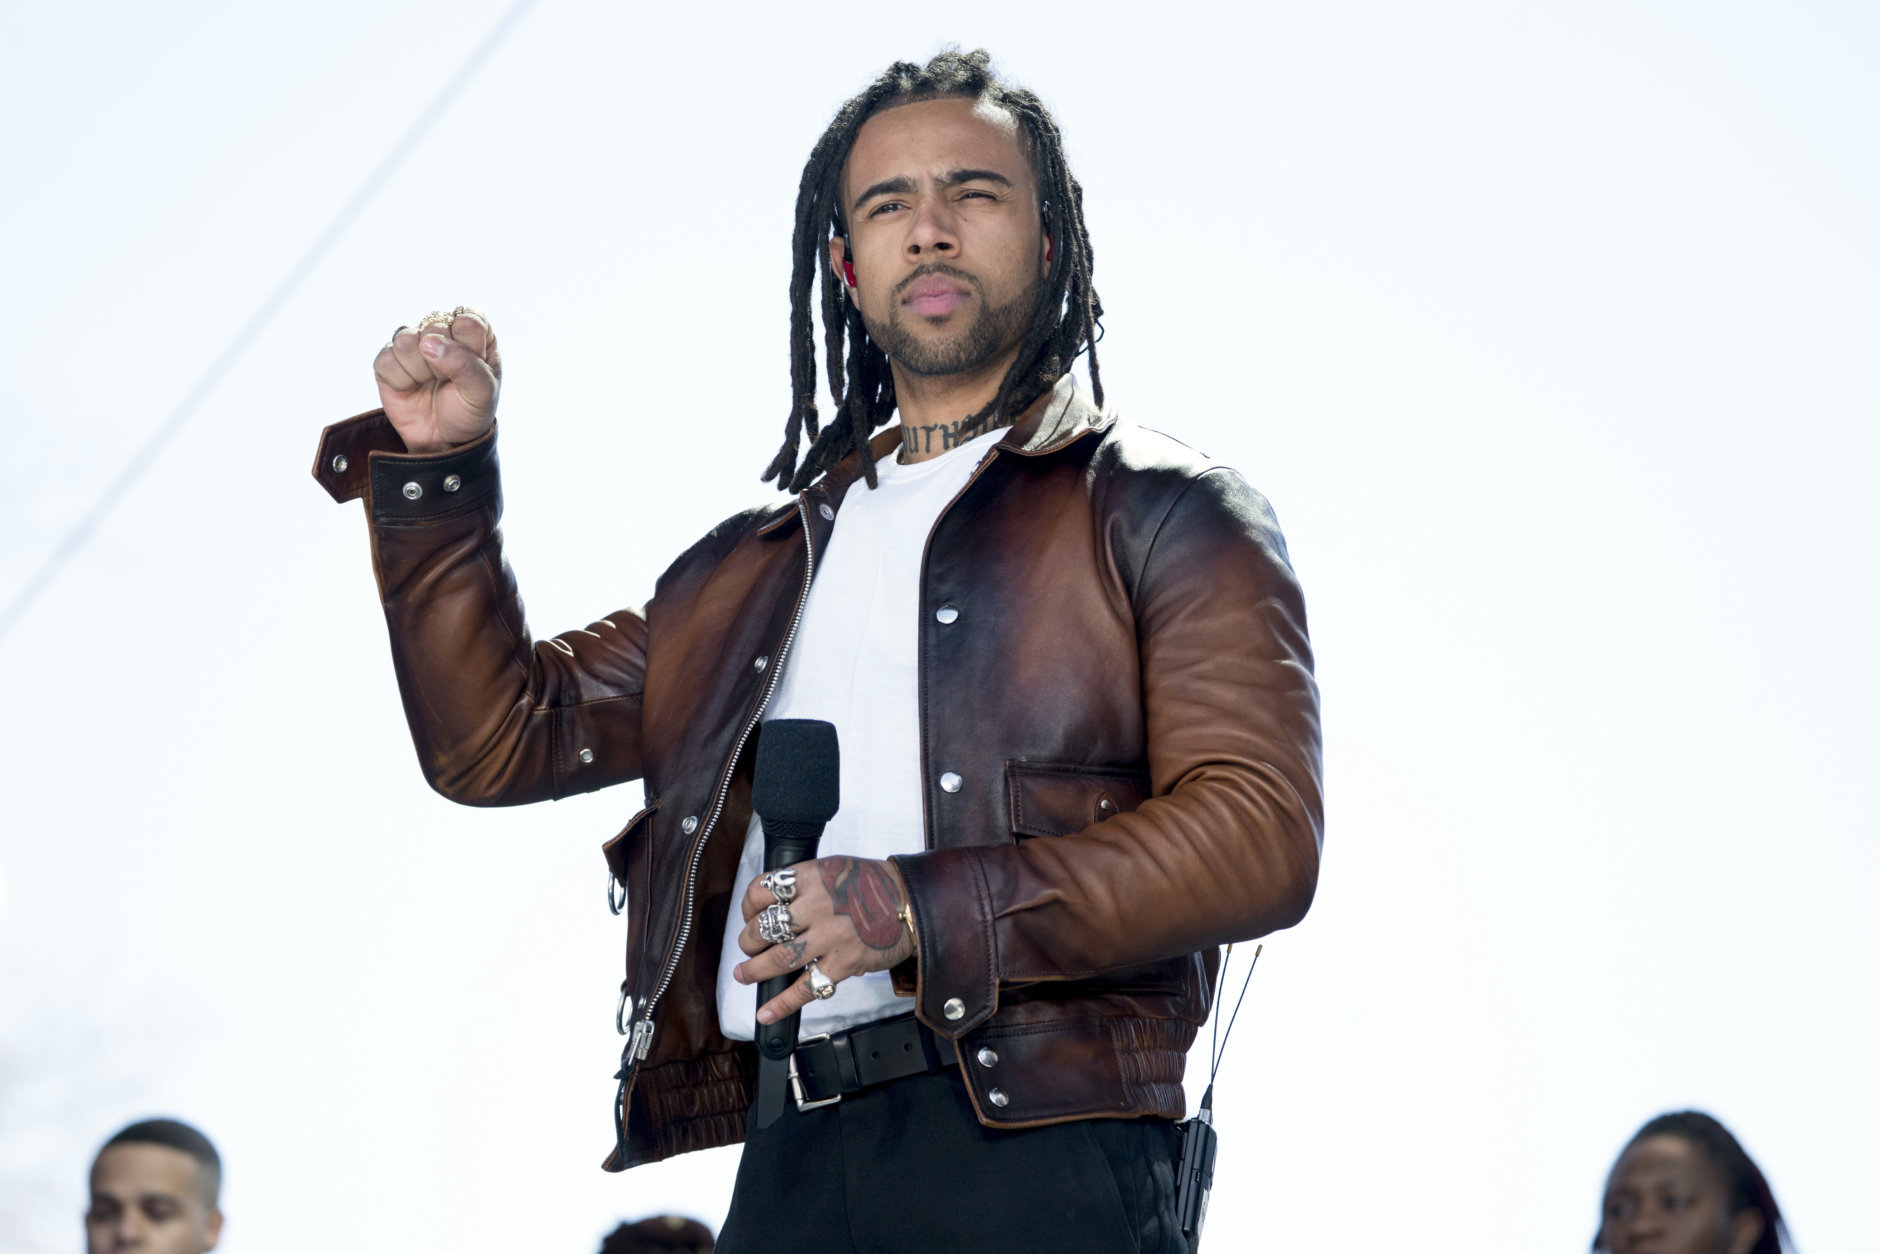 Vic Mensa performs "We Could Be Free" during the "March for Our Lives" rally in support of gun control in Washington, Saturday, March 24, 2018. (AP Photo/Andrew Harnik)